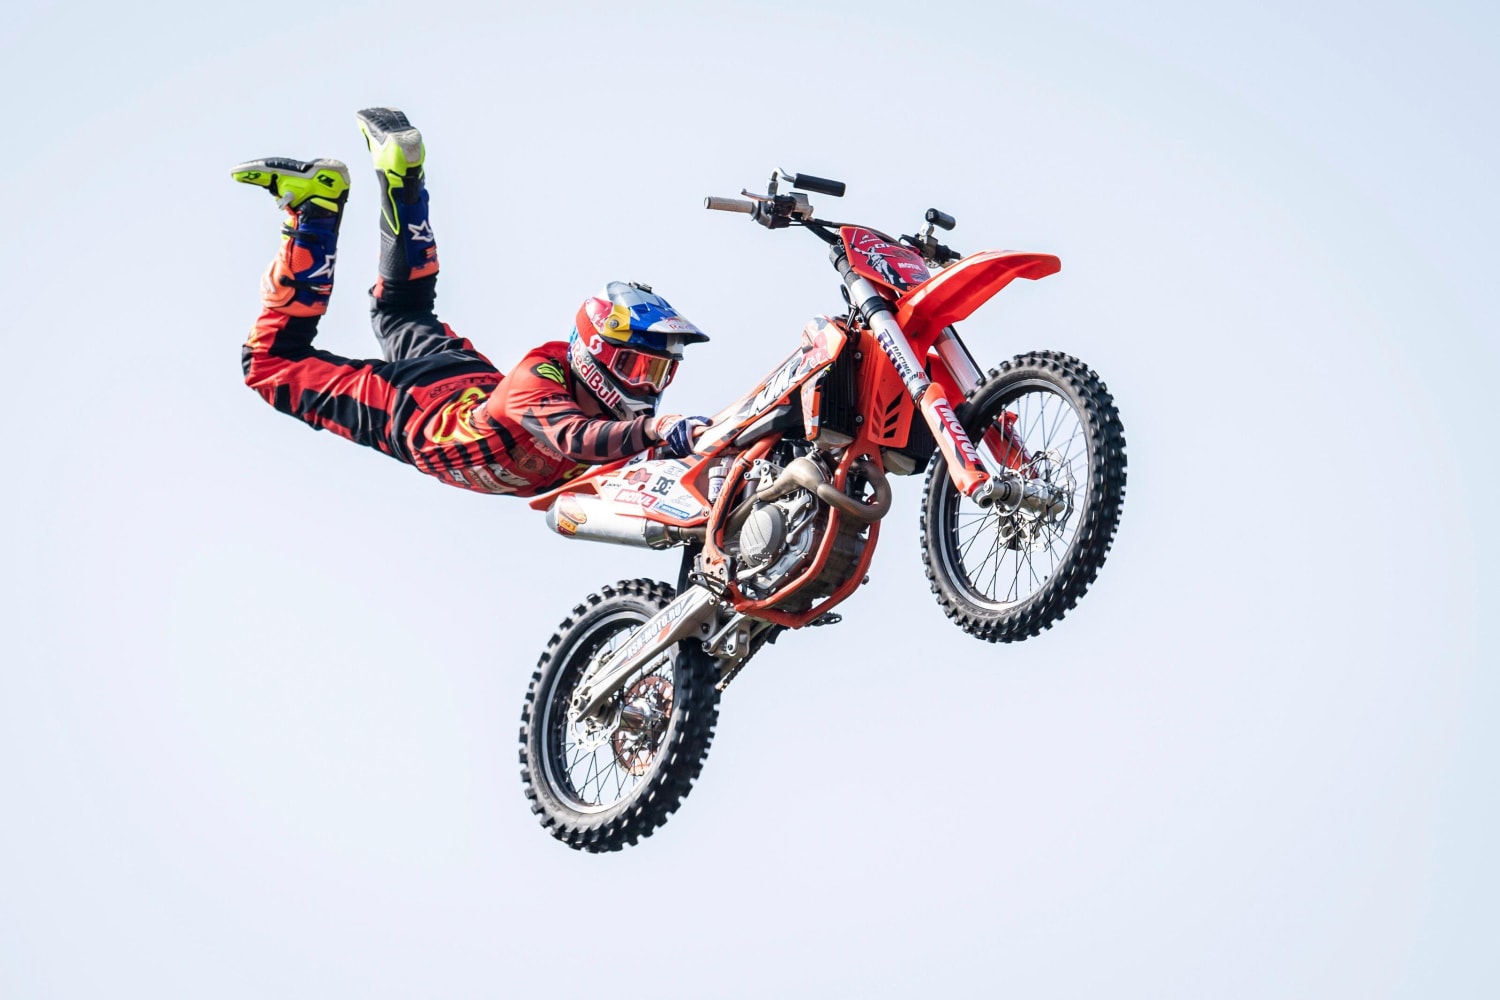 What The Heck is FMX??? —